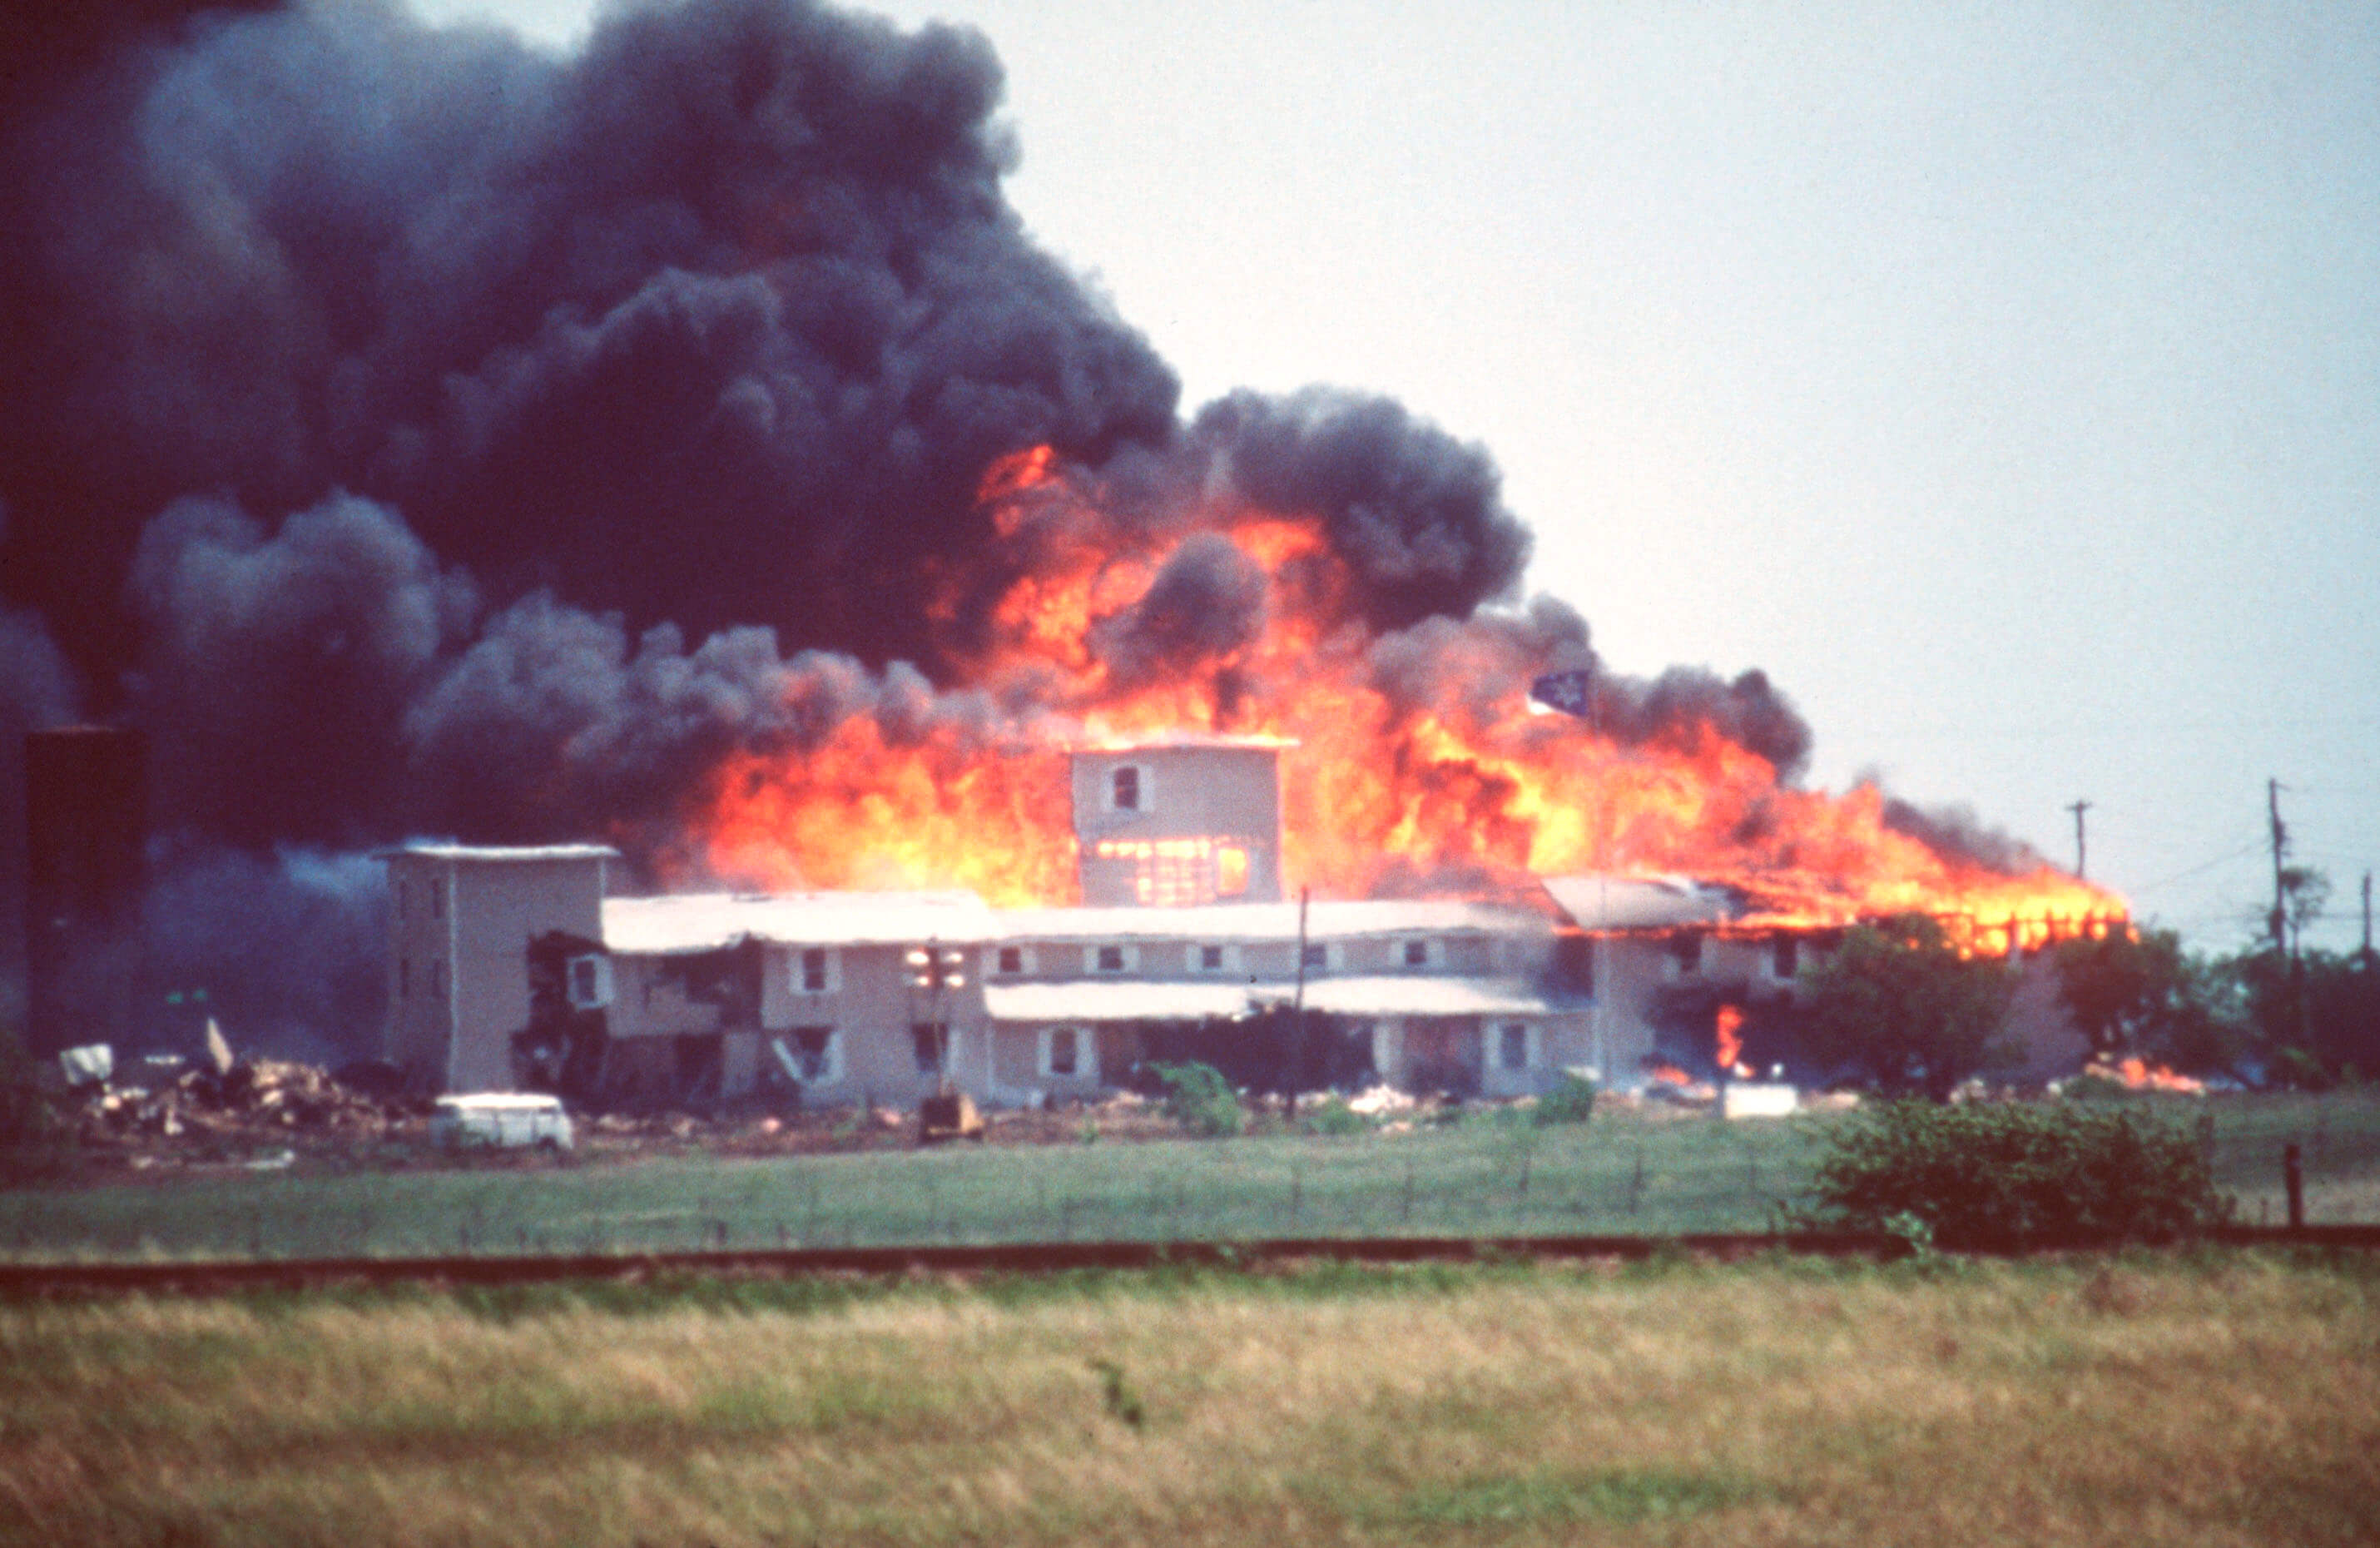 The Branch Davidian compound on fire during the Waco siege